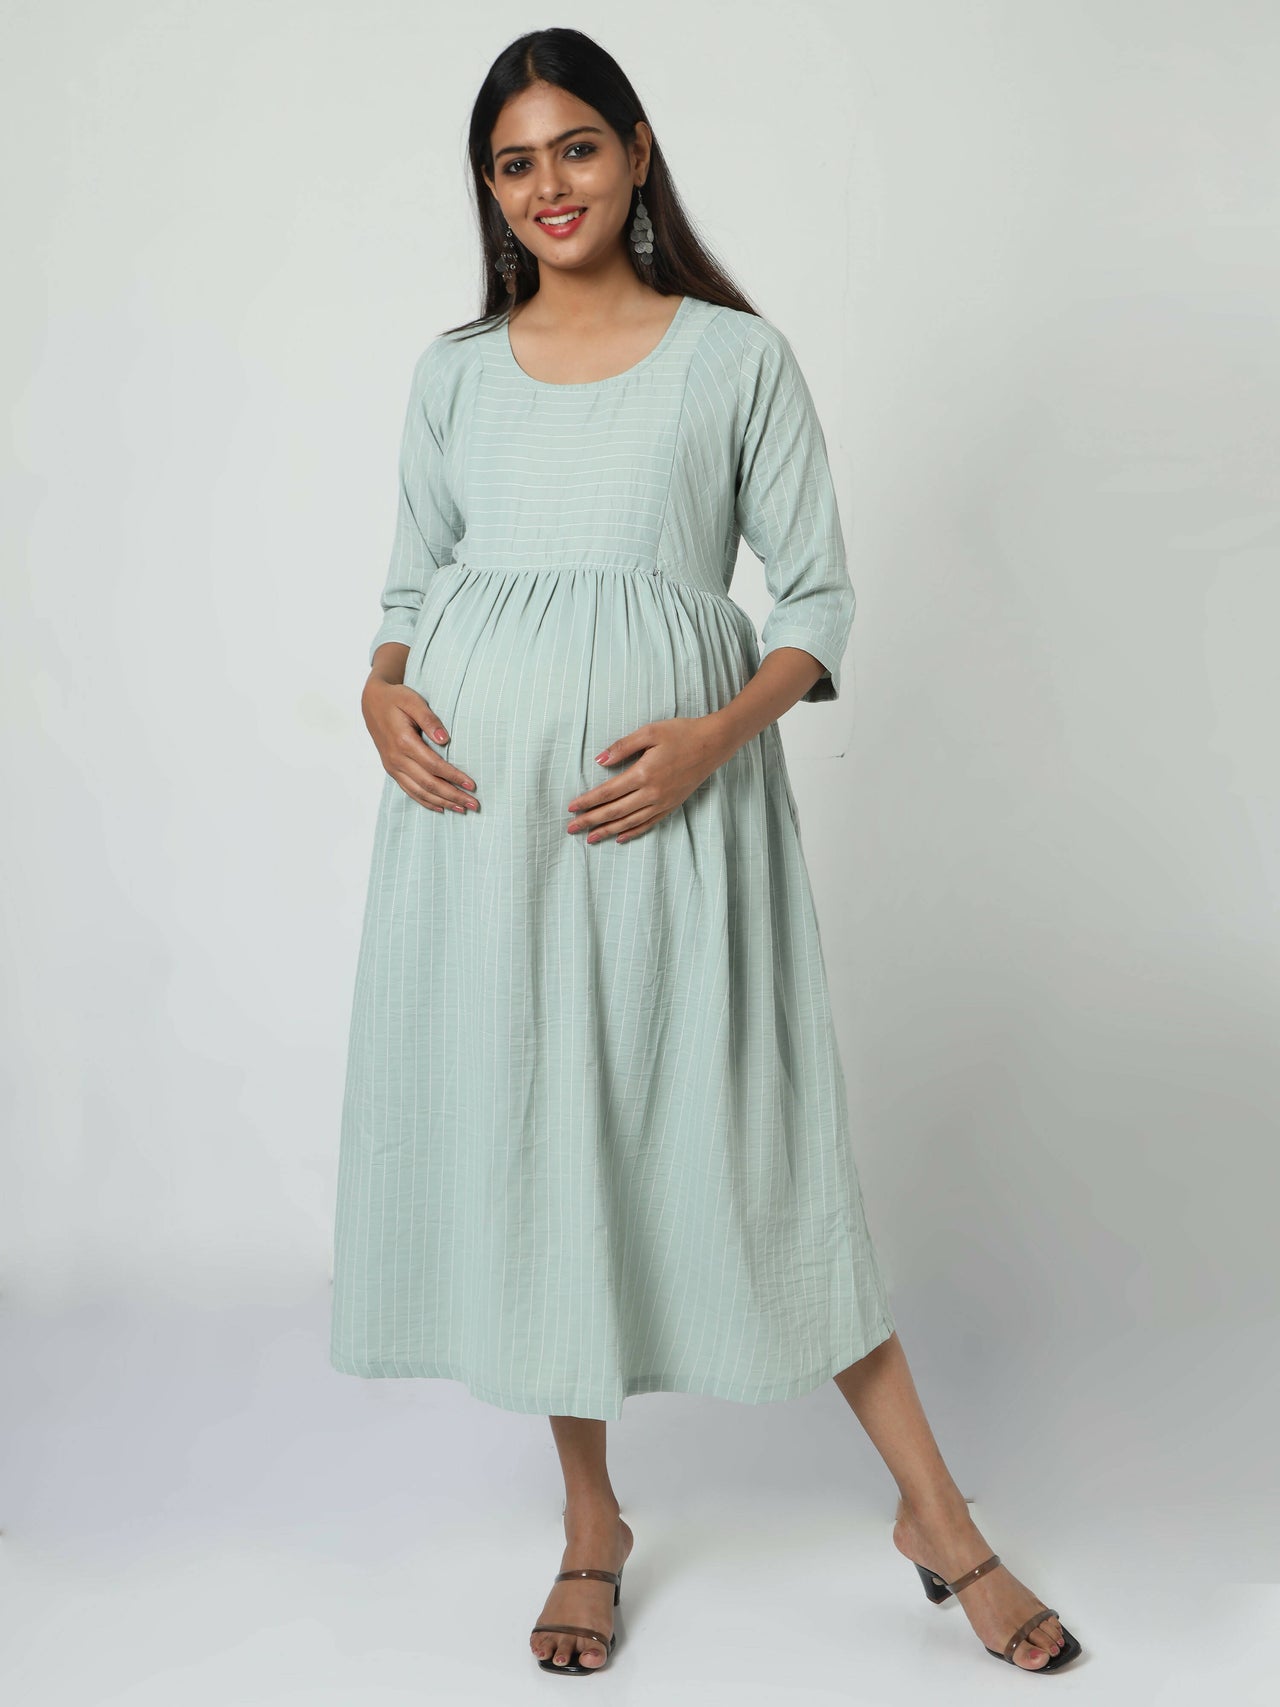 Manet Three Fourth Maternity Dress Striped With Concealed Zipper Nursing Access - Pista Green - Distacart